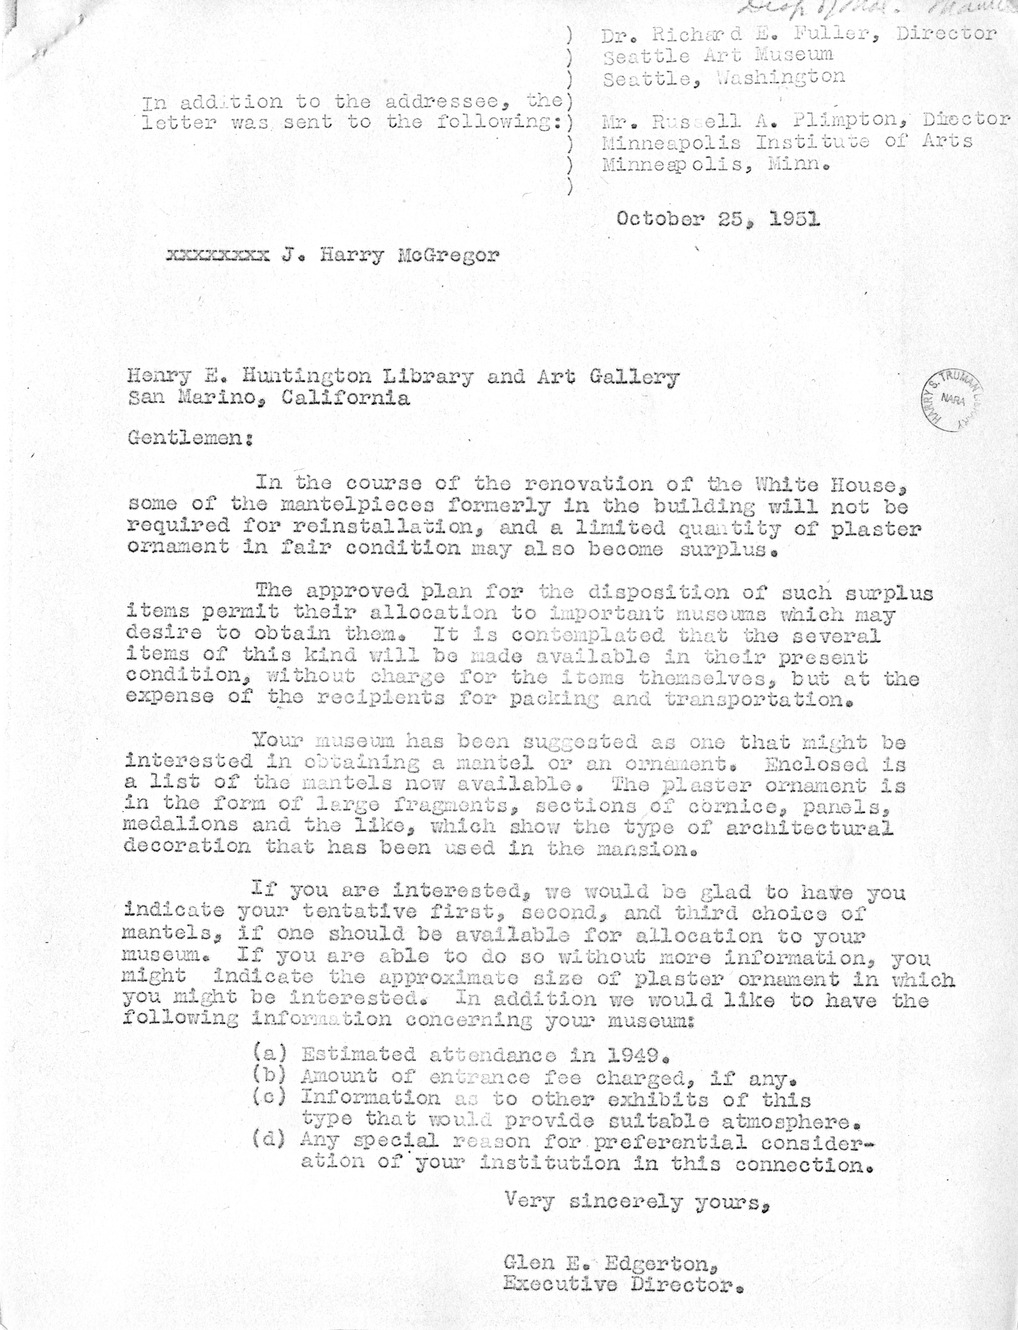 Letter from Major General Glen E. Edgerton to Various Recipients, with Attachment